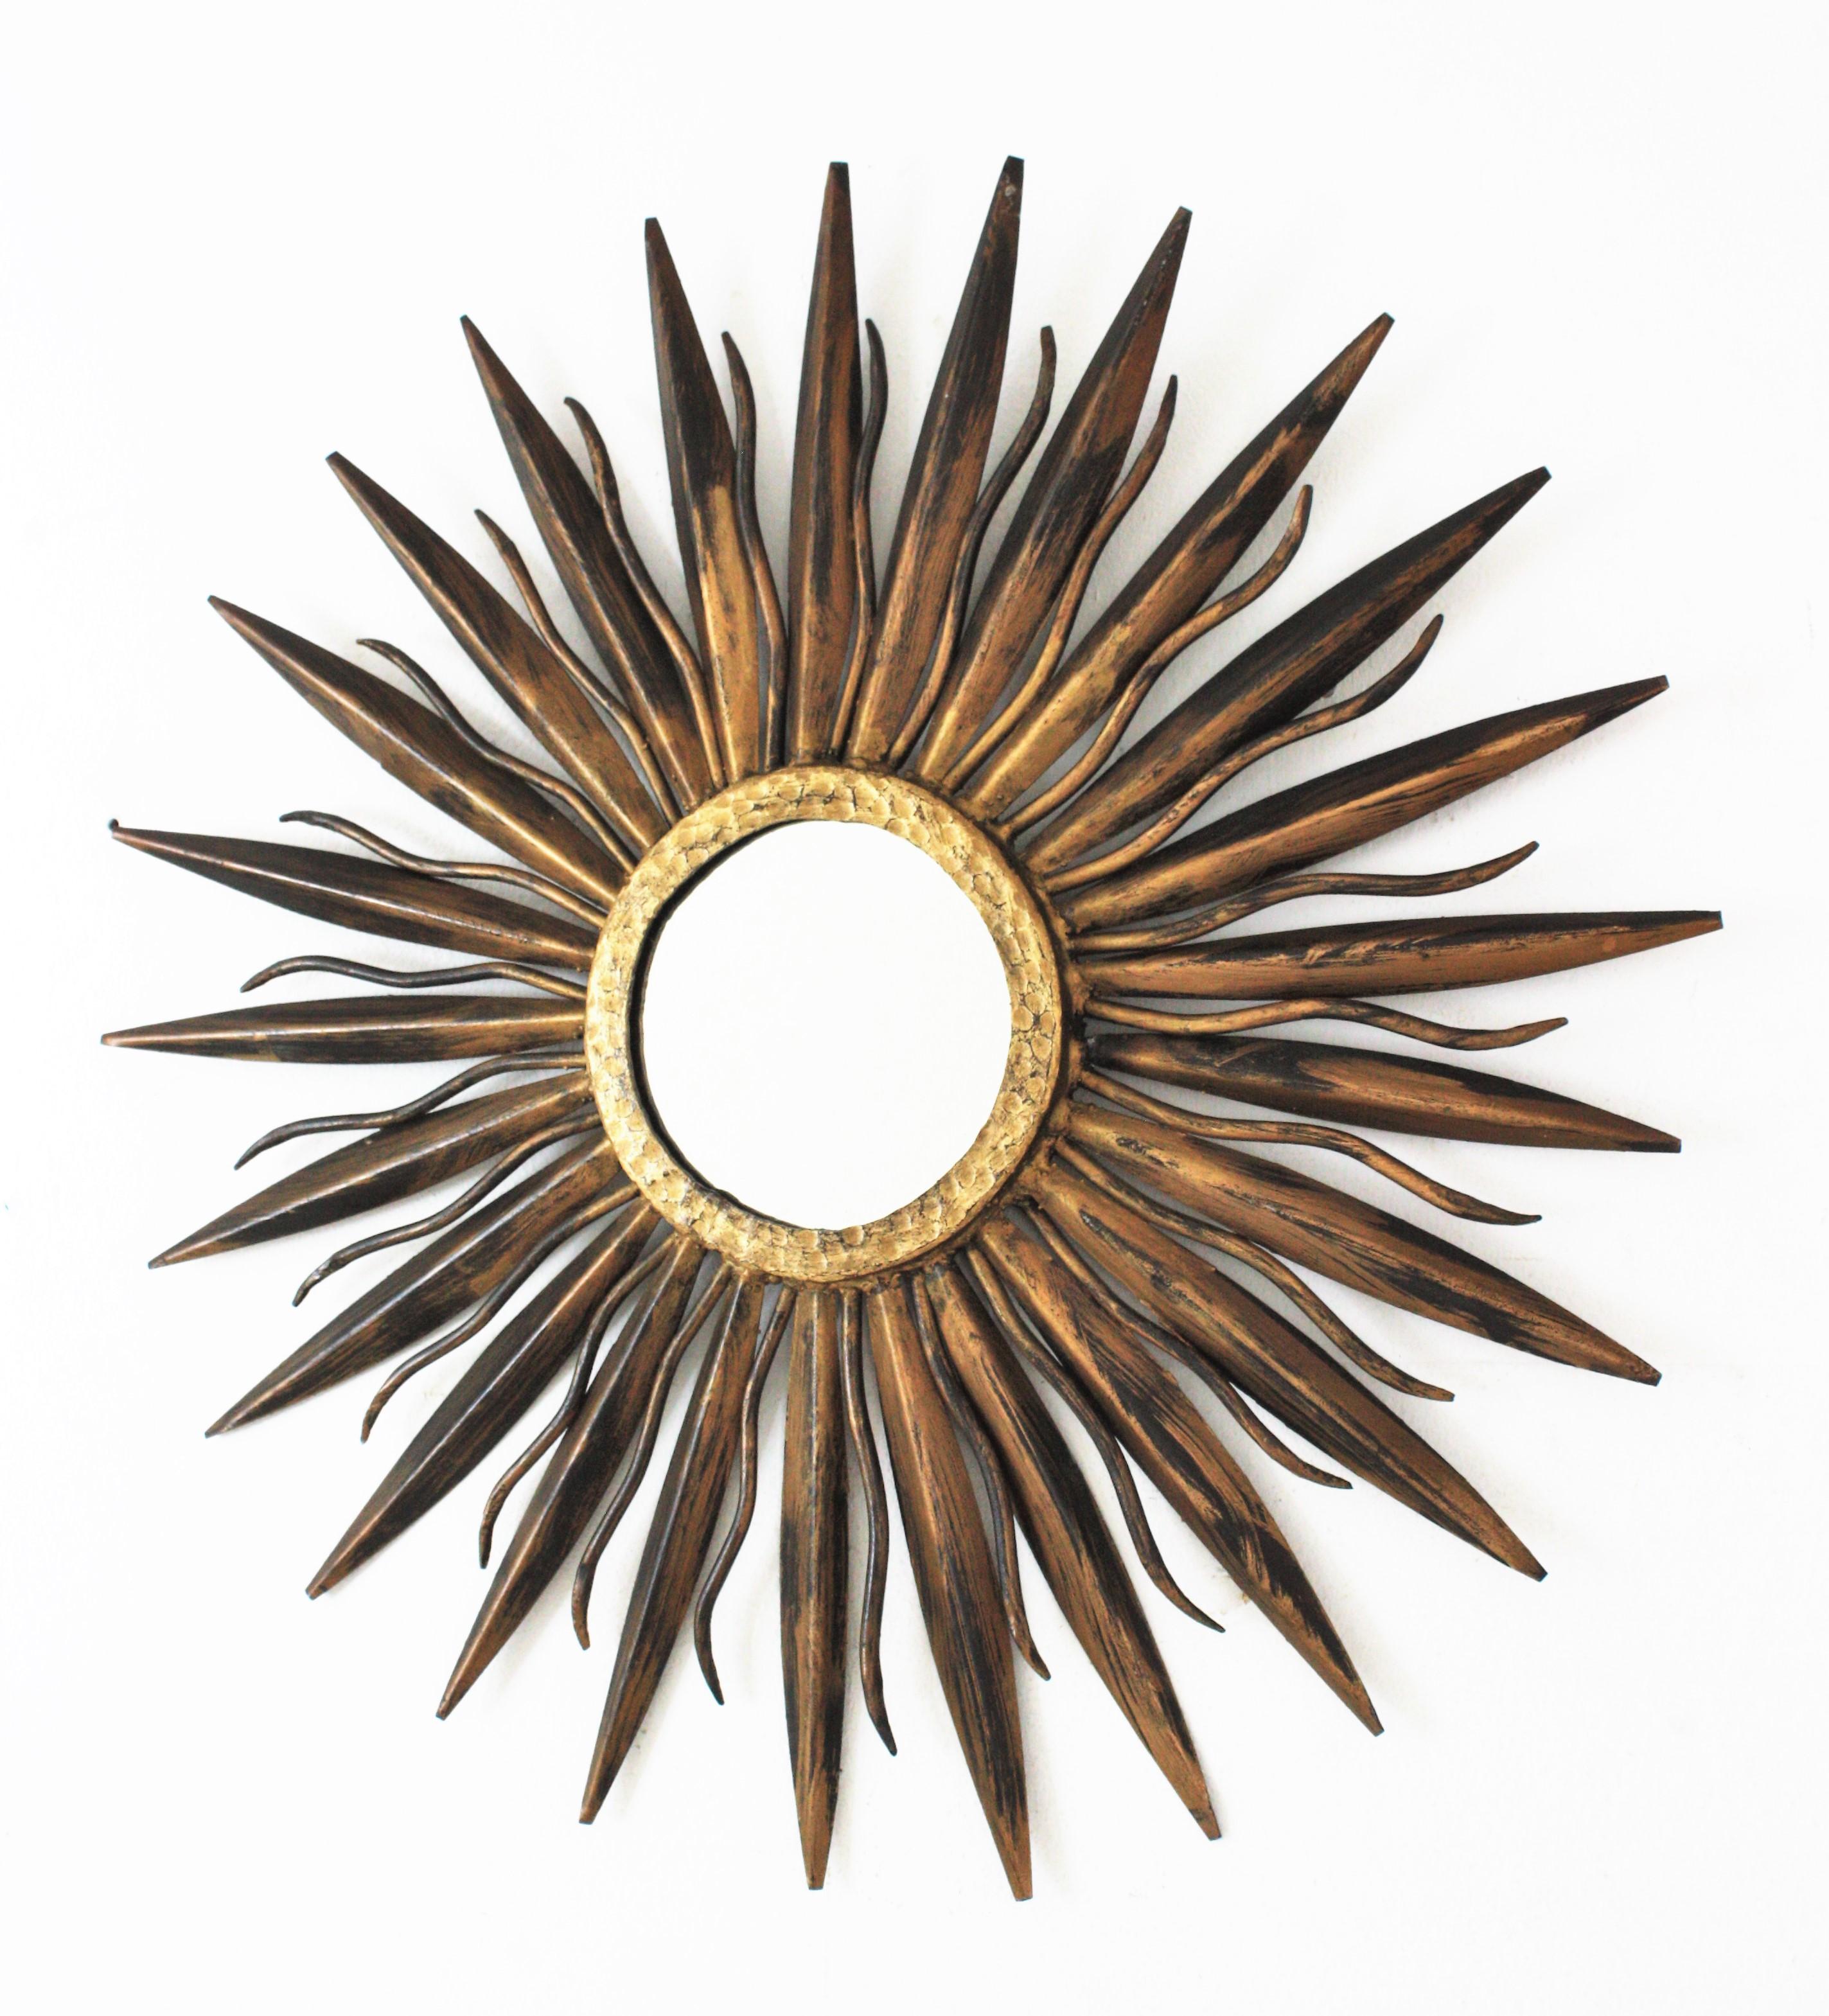 Sunburst mirror in hand forged iron and gilt patina. Spain, 1940s-1950s.
This sunburst mirror features a frame made of hand forged spikes and leaves attached to a central ring. Gilt patinated finish in two tones.
Terrific aged patina and